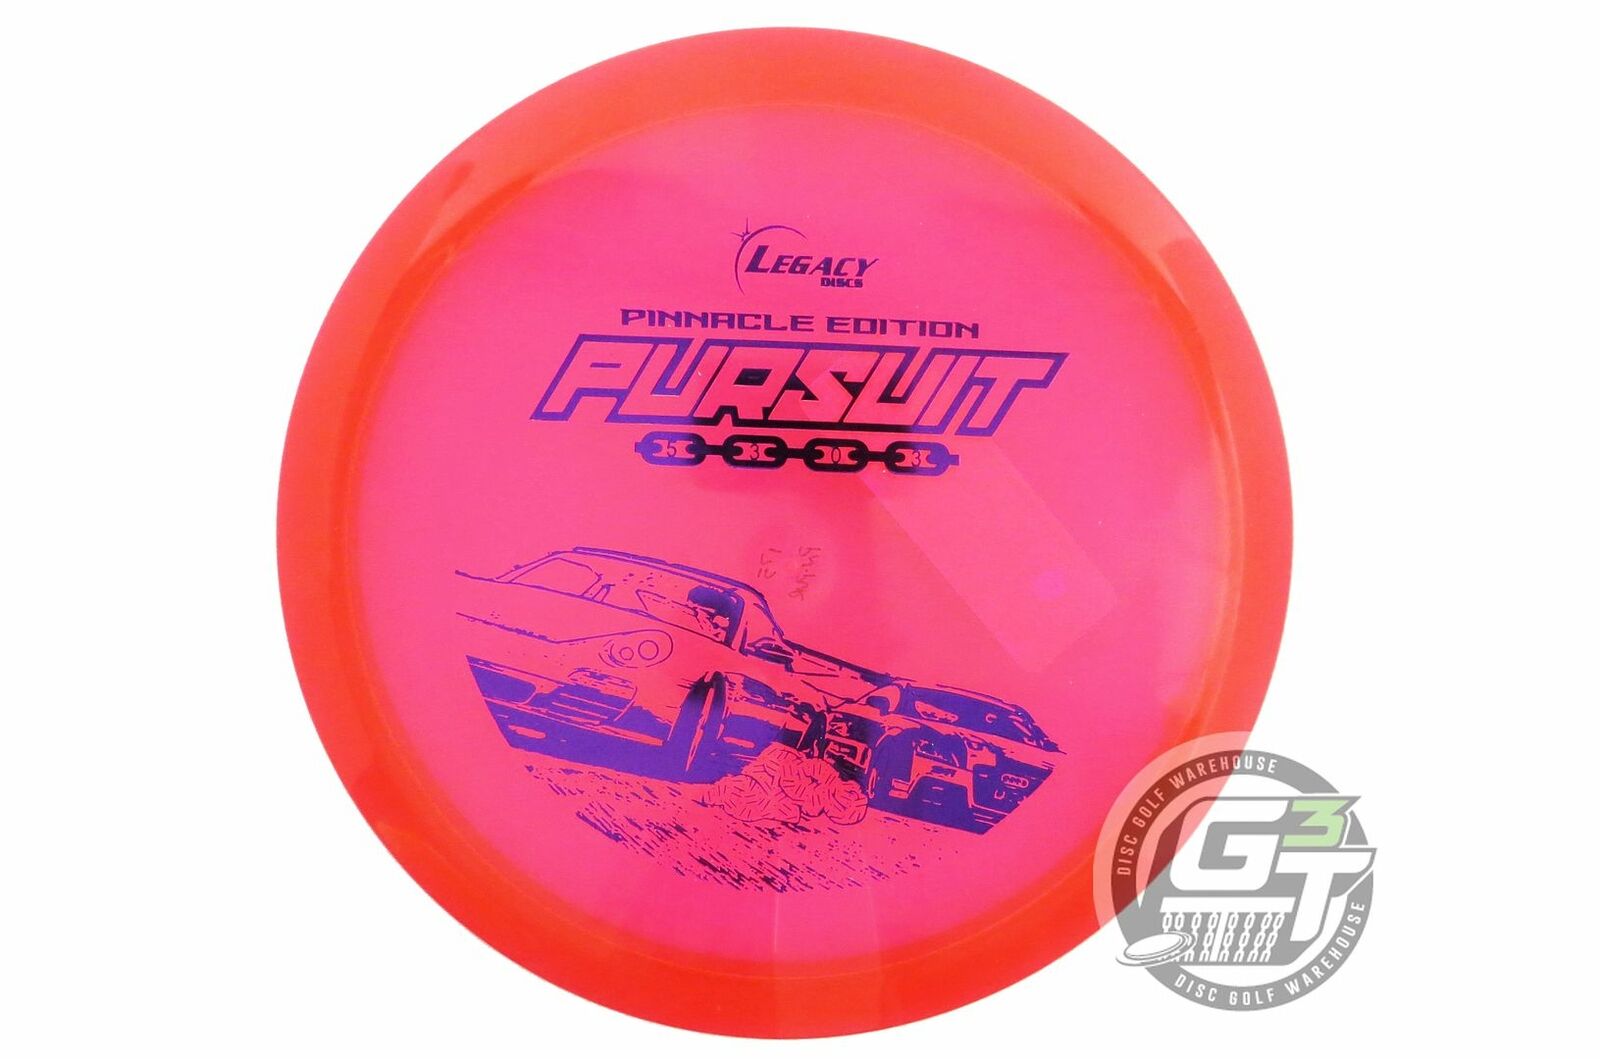 Legacy Pinnacle Edition Pursuit Midrange Golf Disc (Individually Listed)